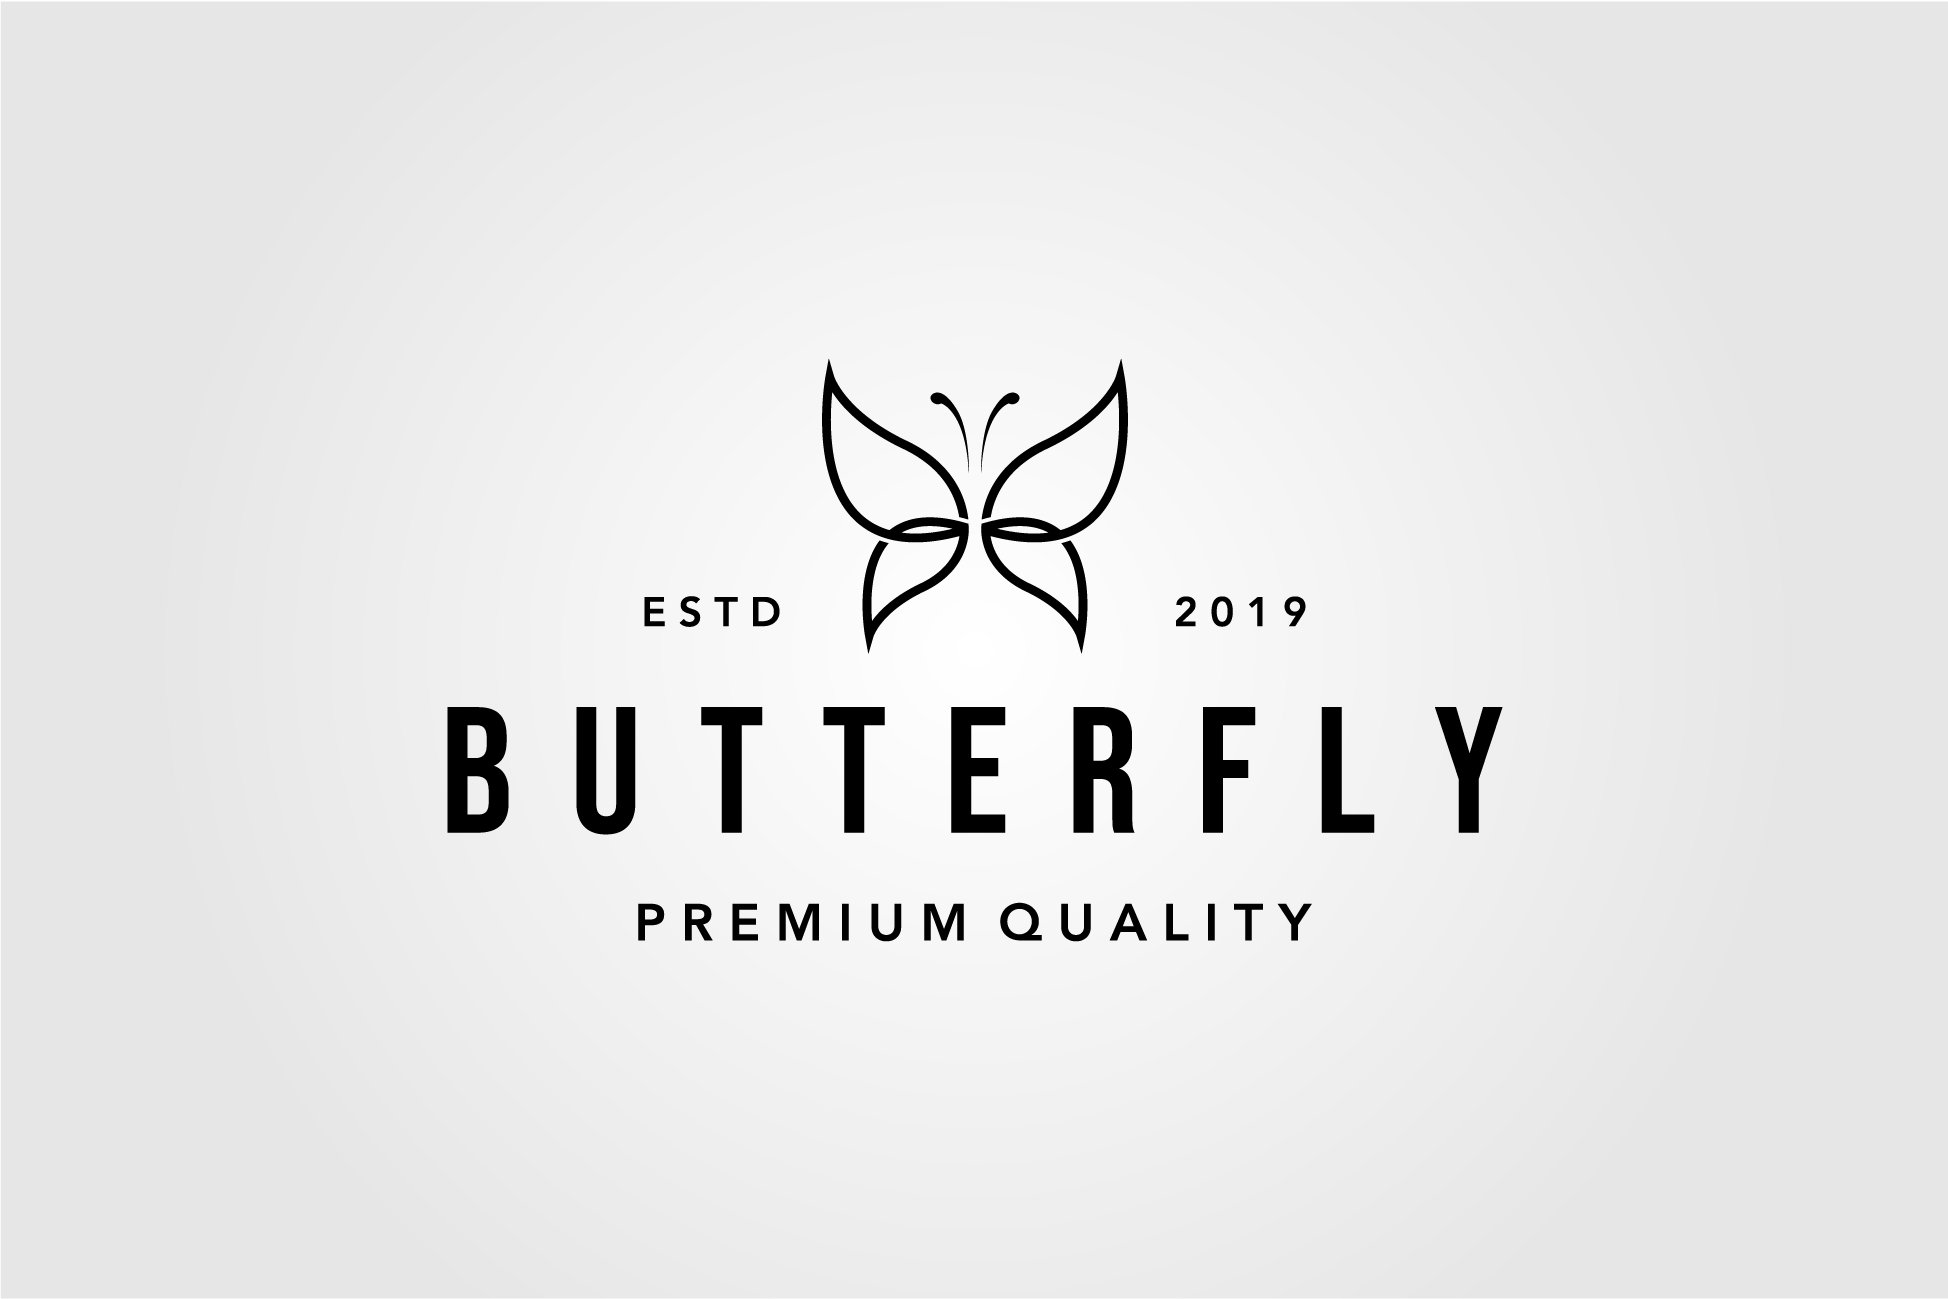 Line Art Butterfly Vintage Logo cover image.